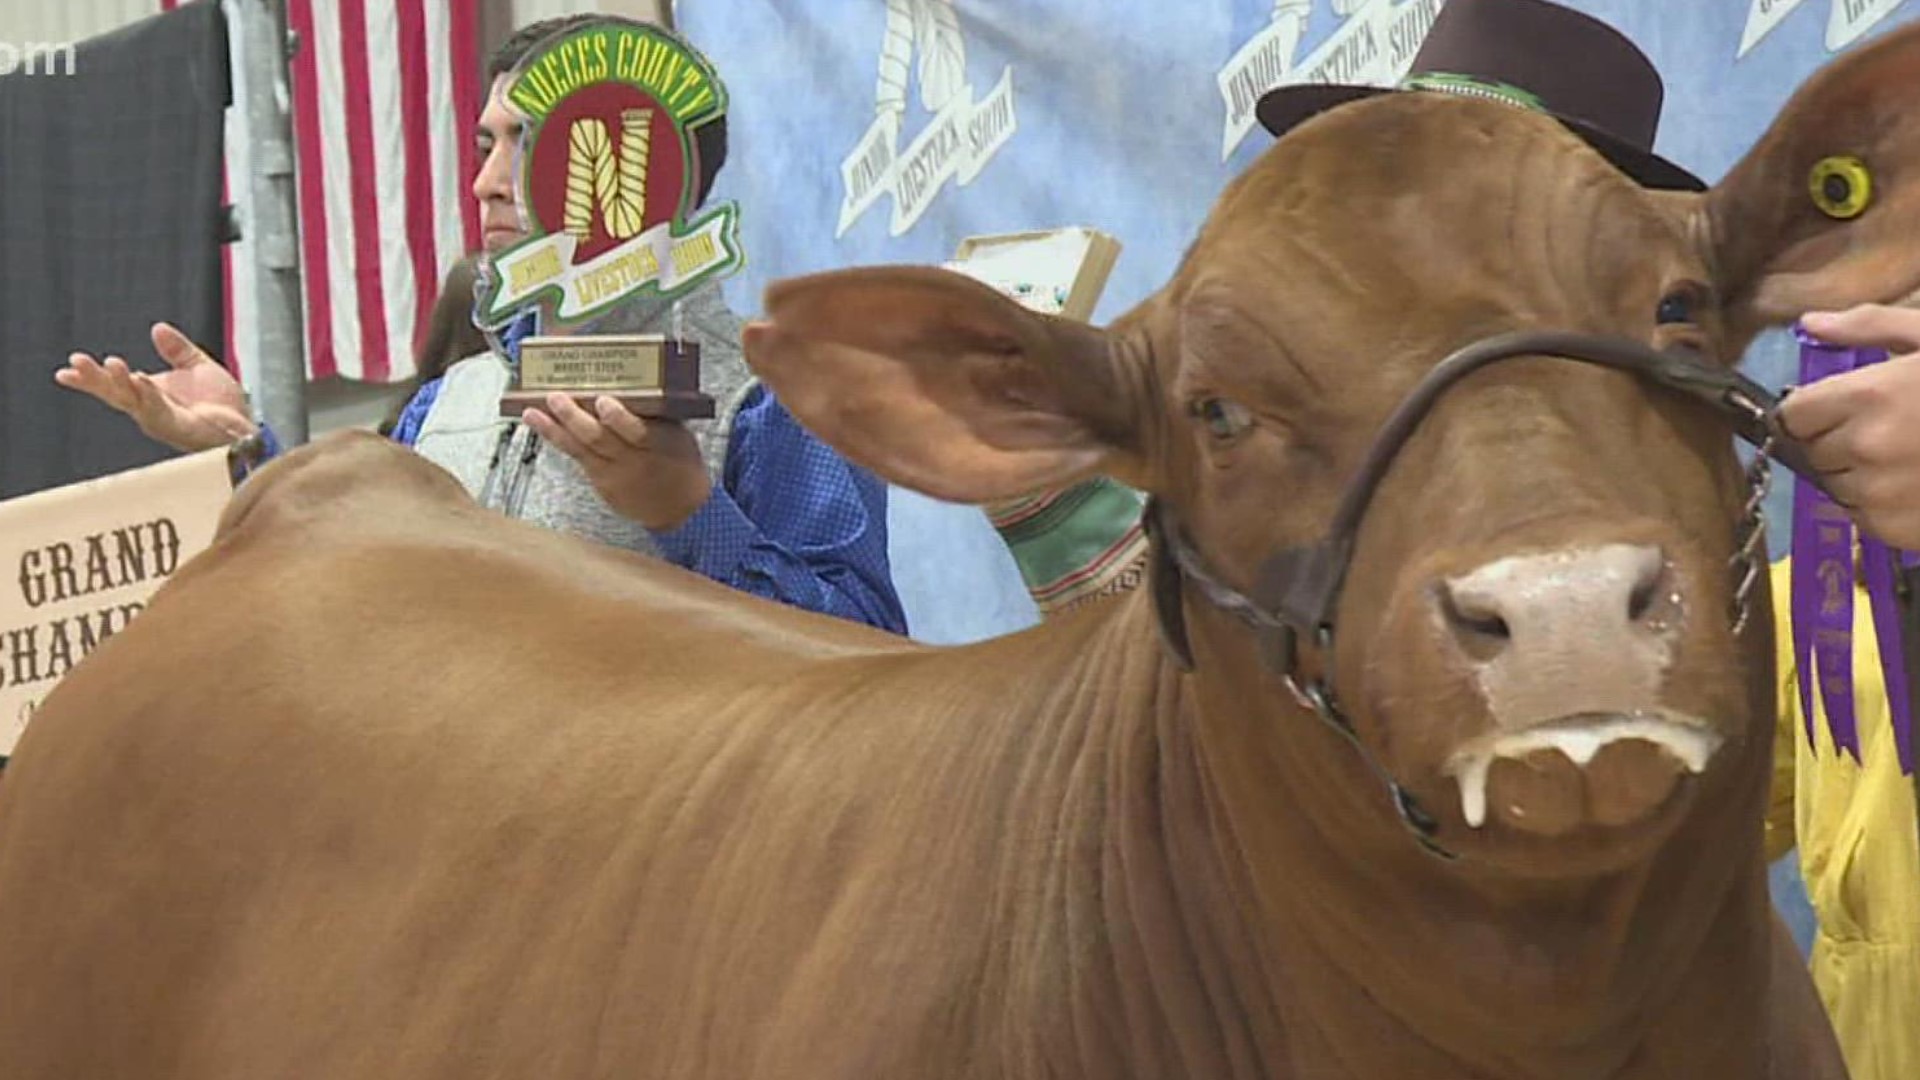 Brandon Schaff reports from the Nueces County Junior Livestock Show with the final day of the festivities.